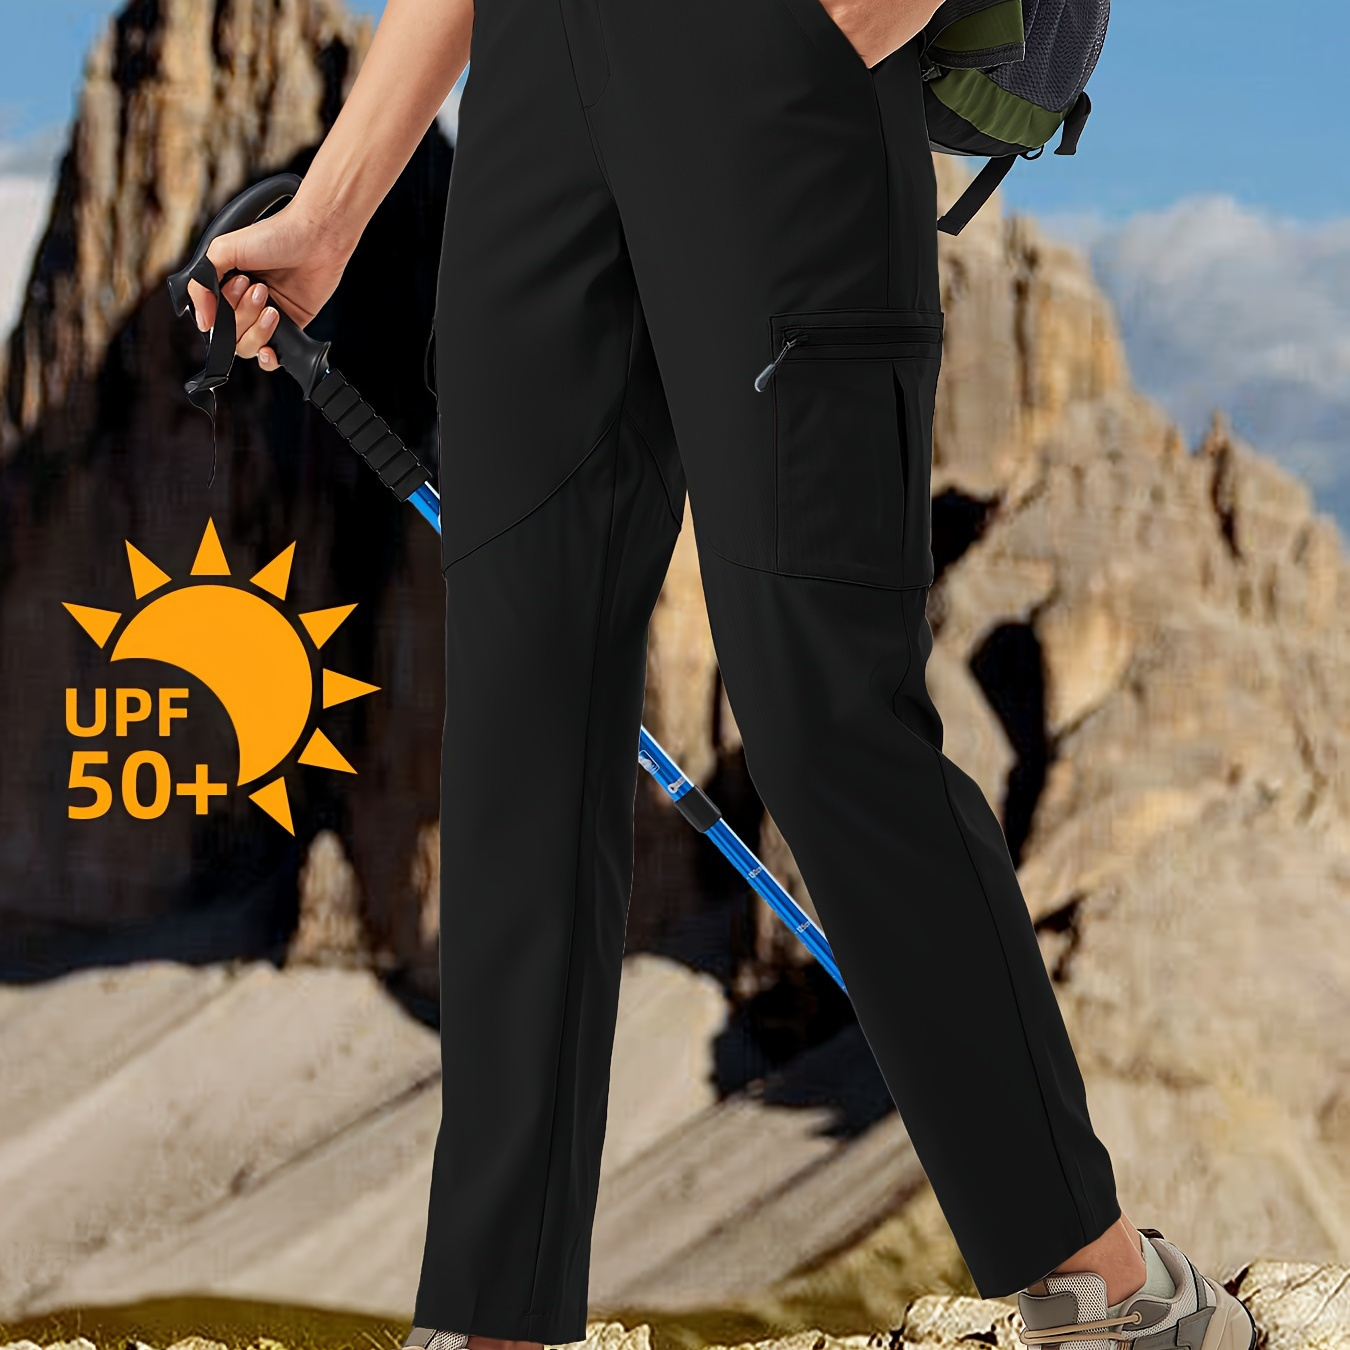 

Women's Hiking Cargo Pants Water-resistant Quick Dry Upf 50+ Travel Camping Work Pants Zipper Pockets